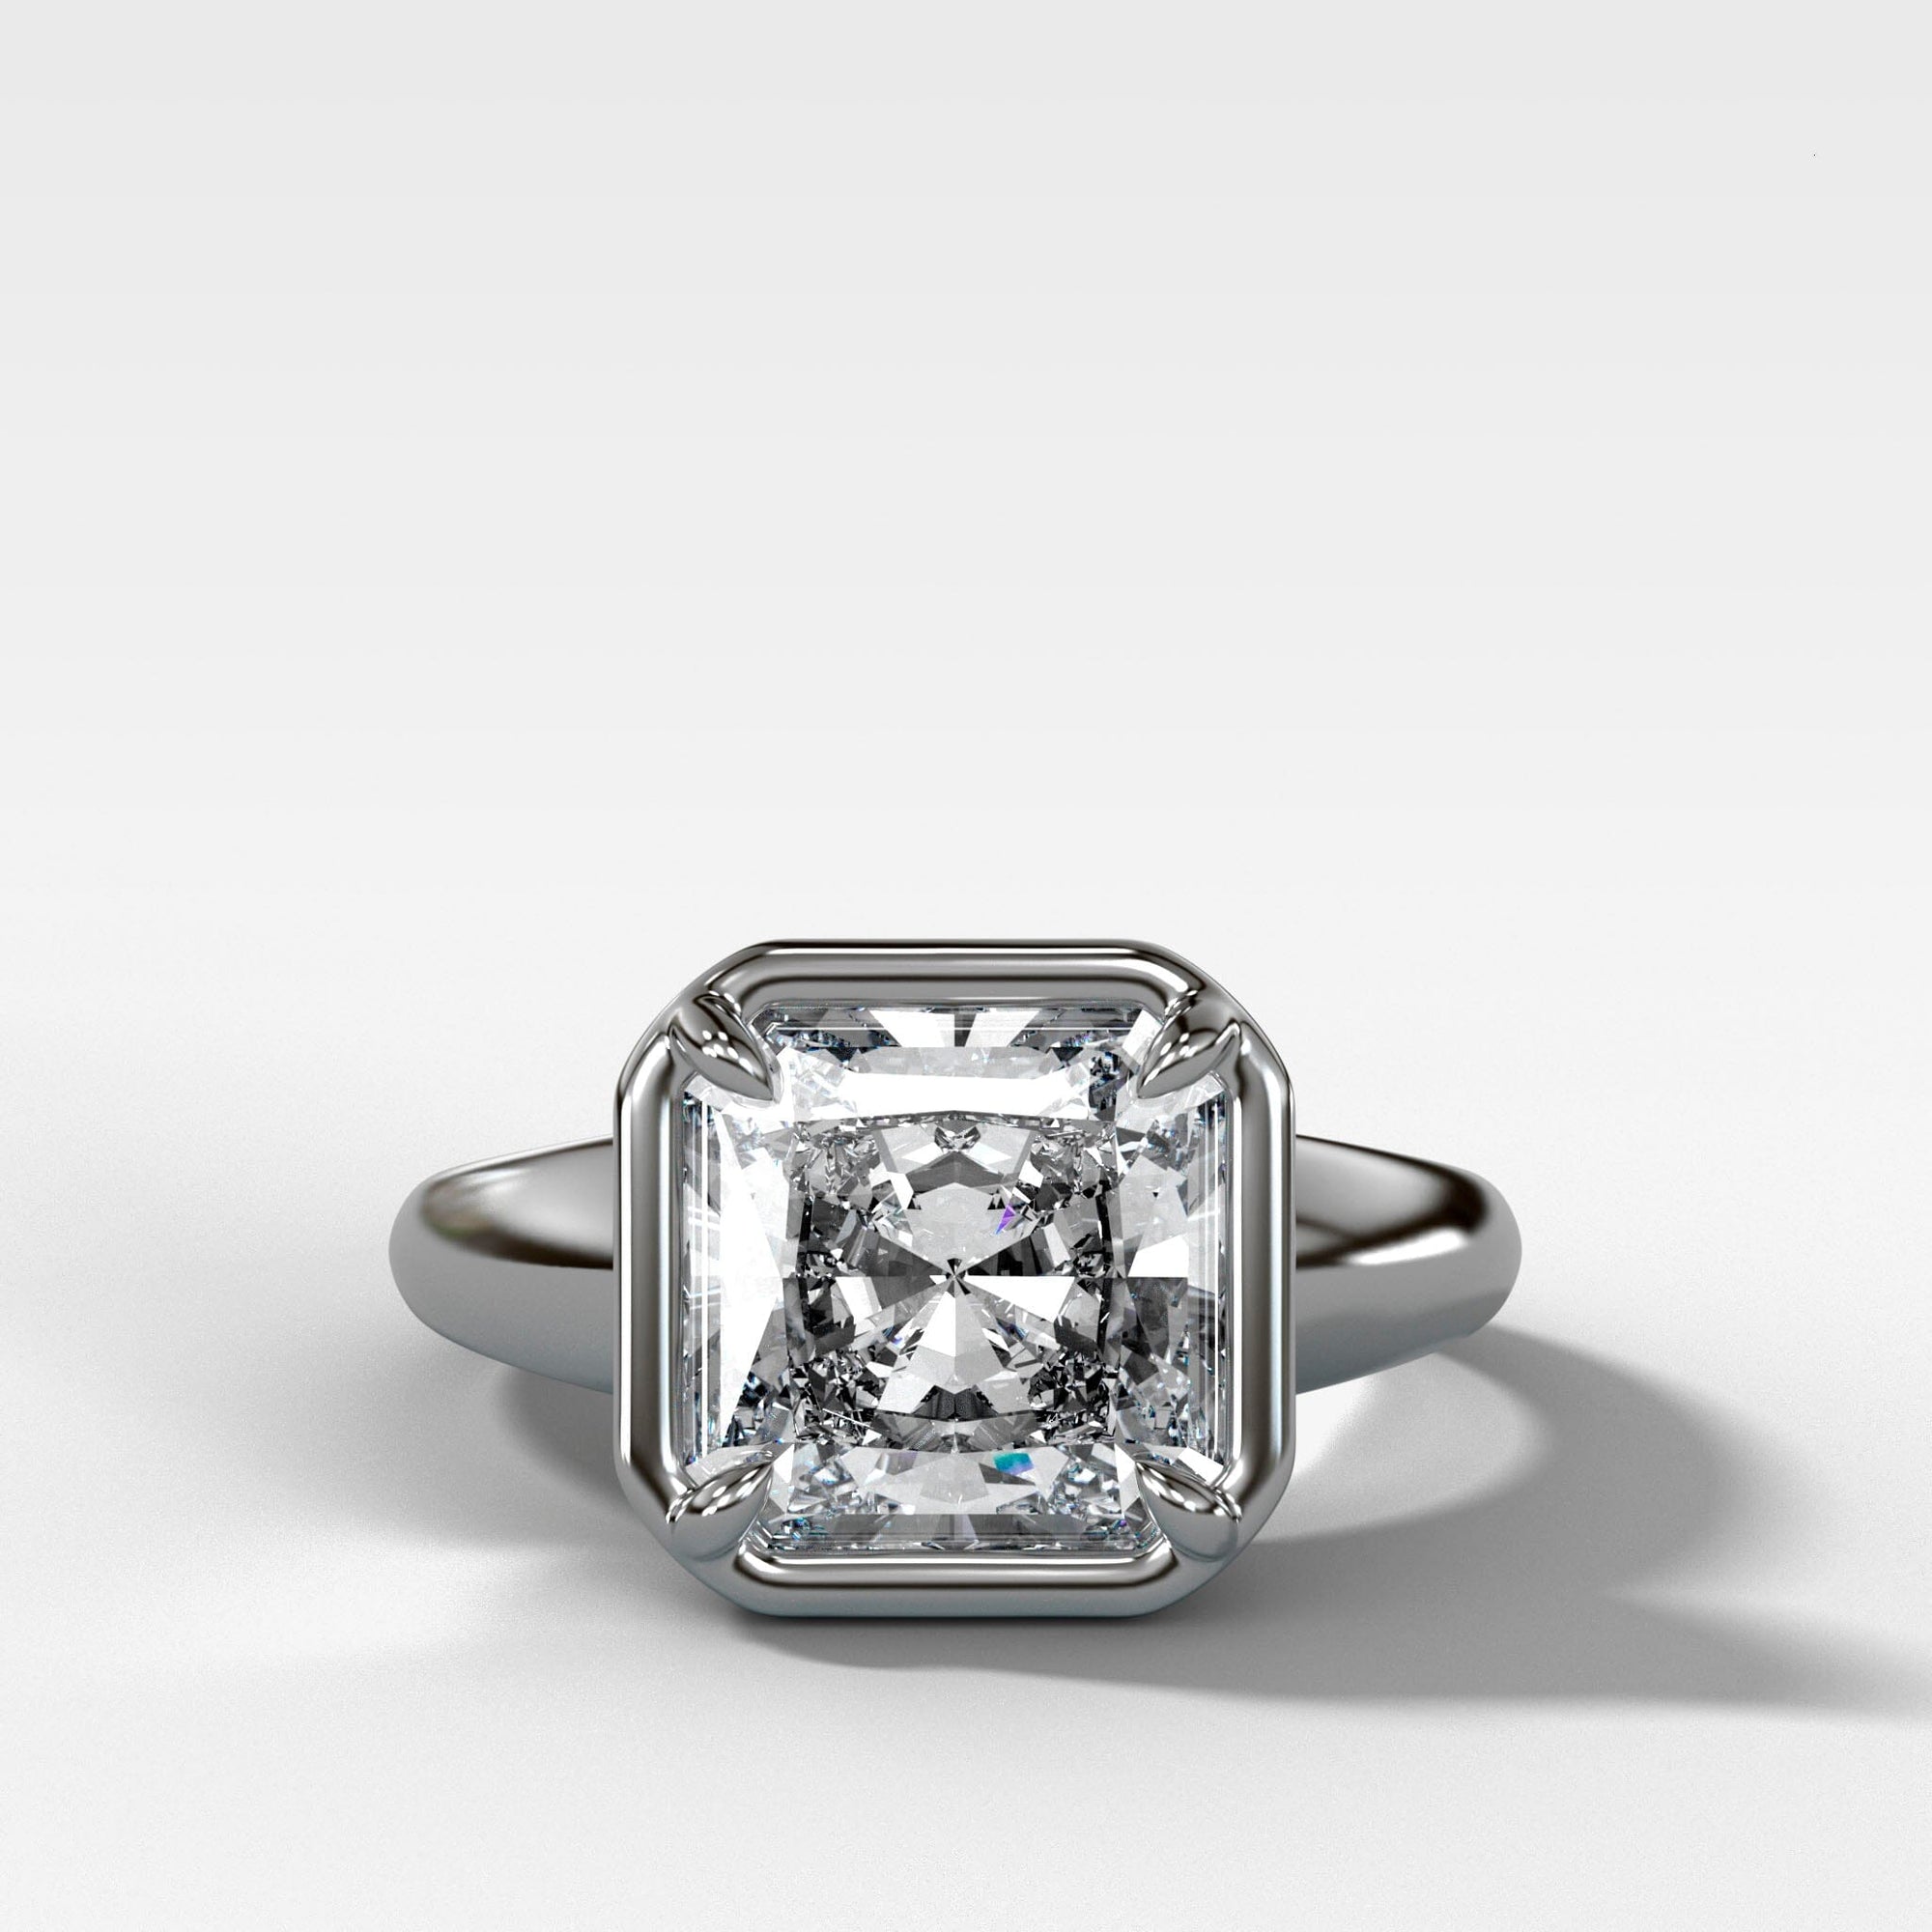 Club Ring Solitaire With a Radiant Cut Engagement Good Stone Inc 